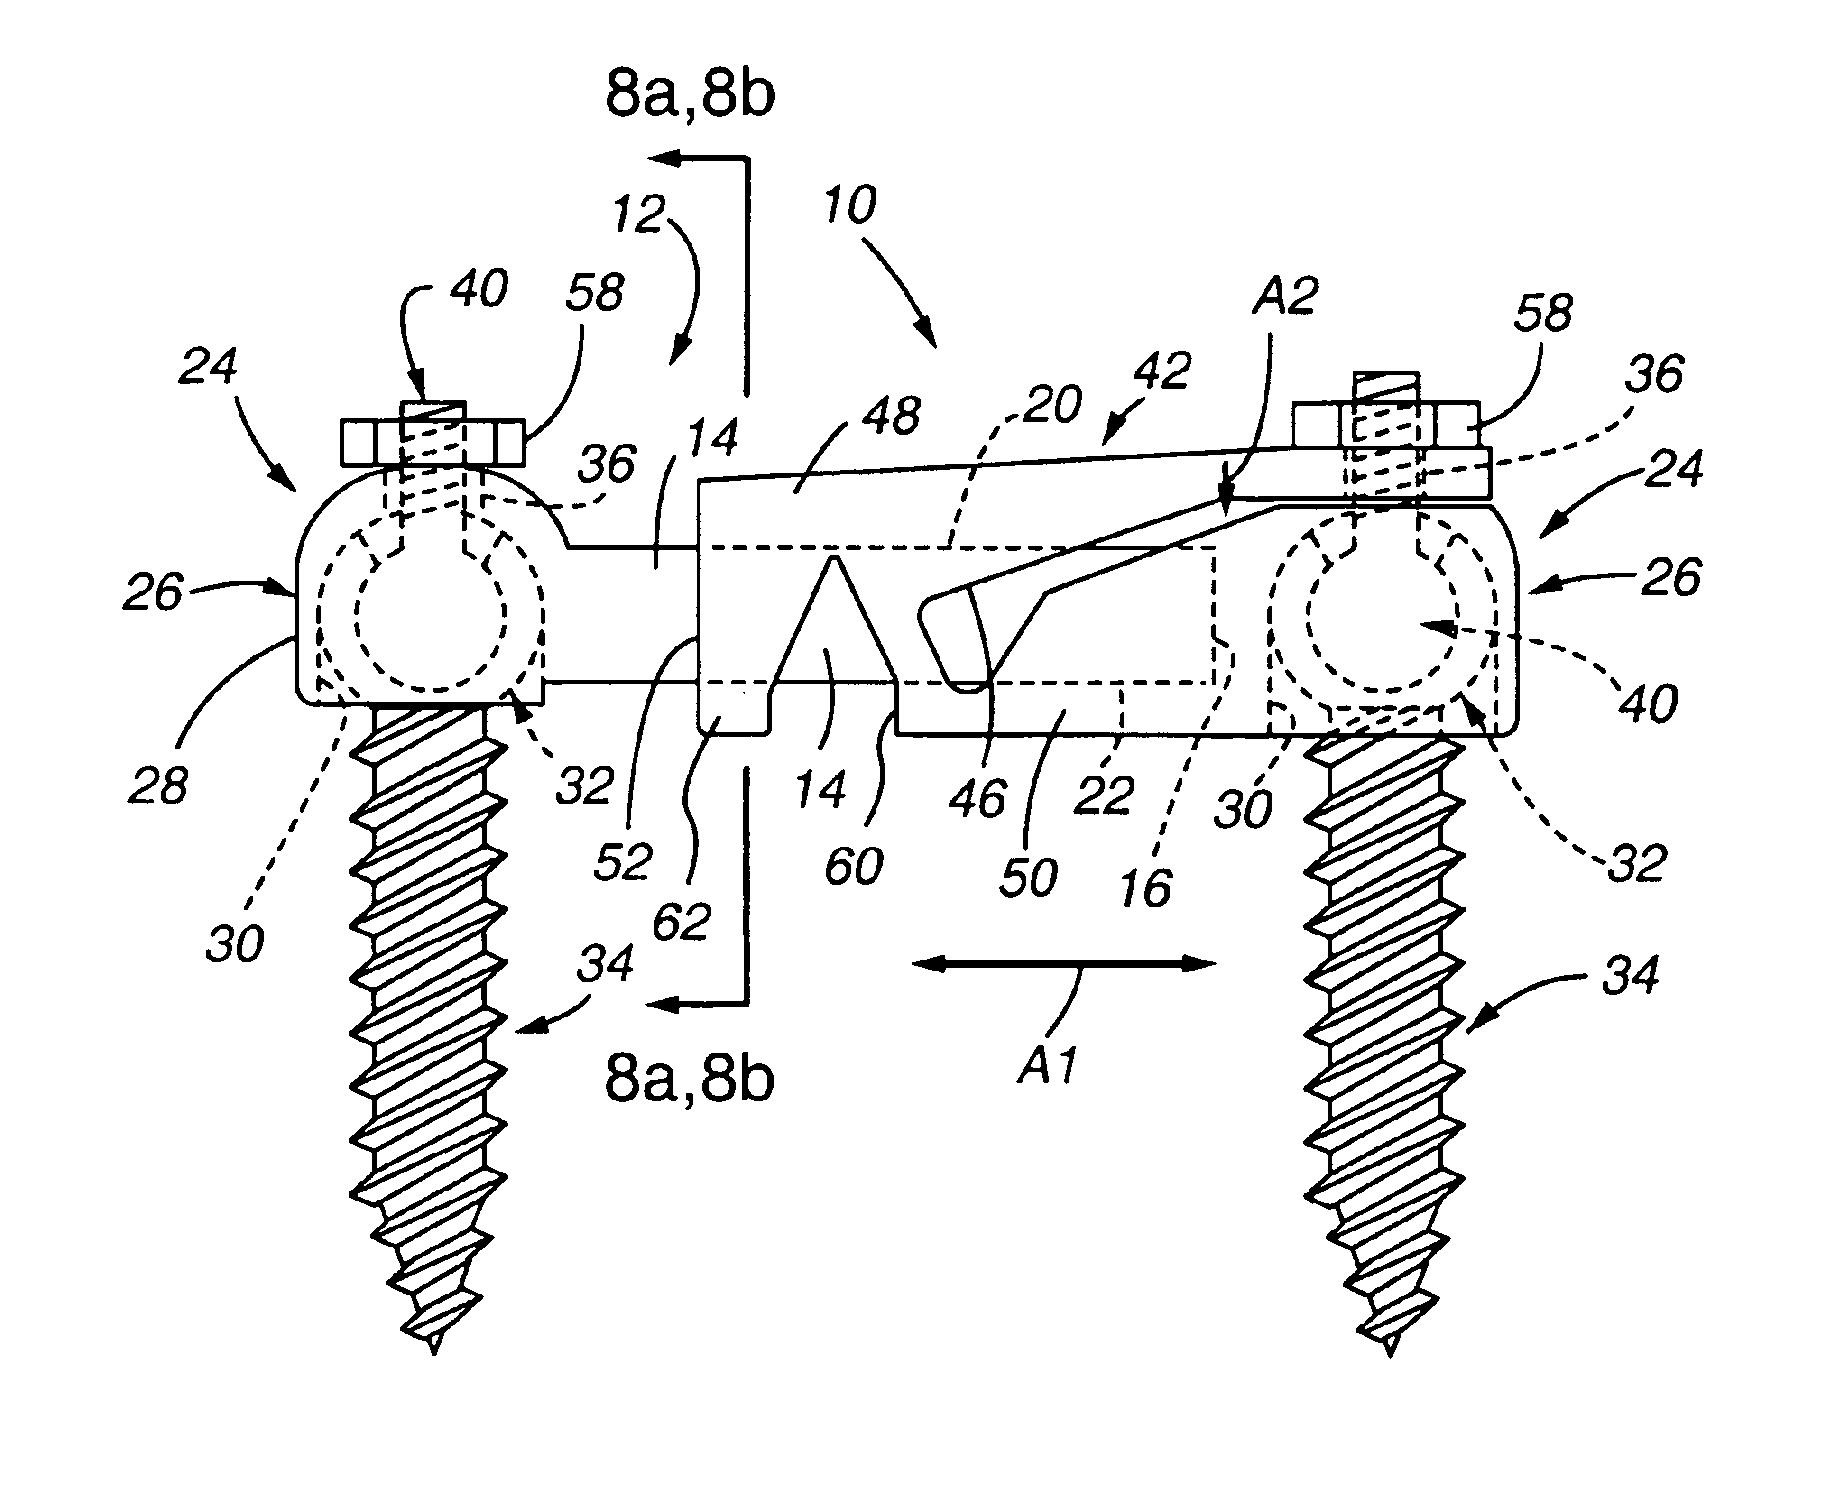 Adjustable rod and connector device and method of use